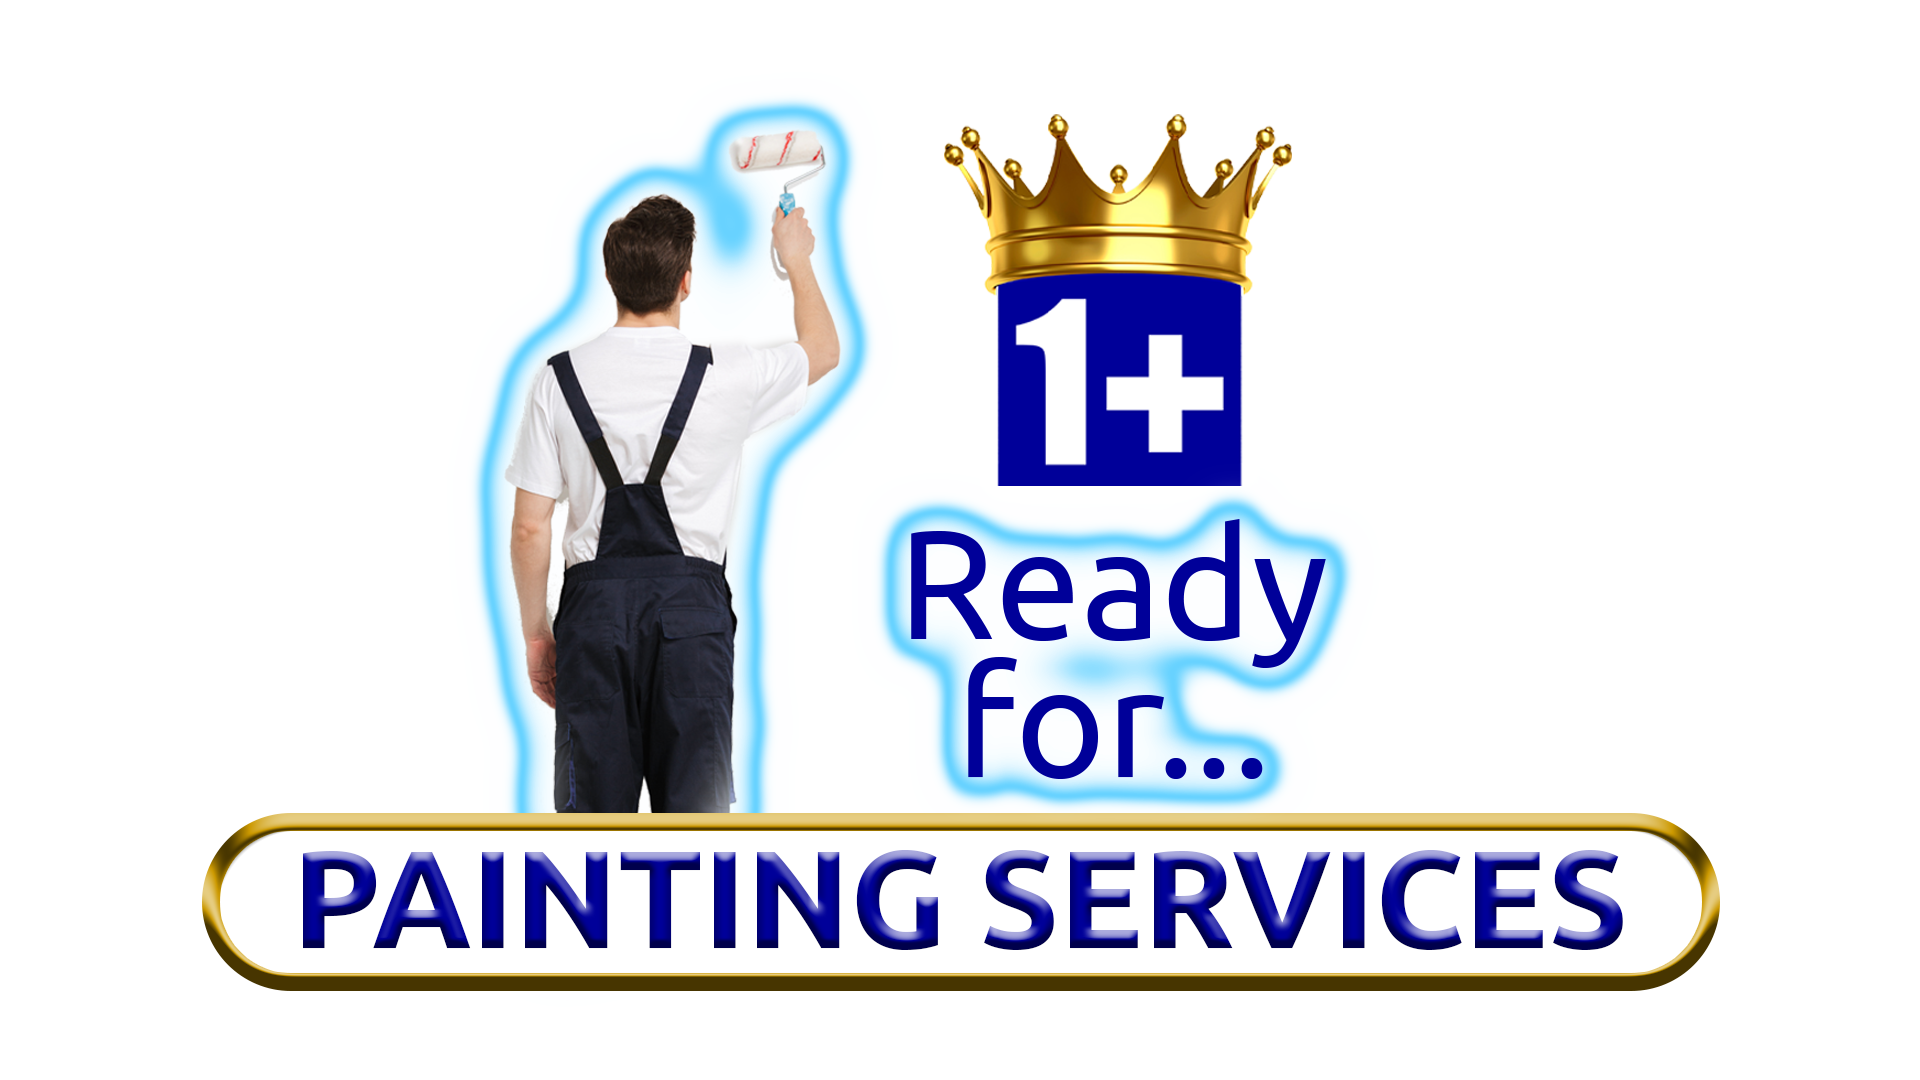 Masterful Painting Services By 1Movers Moving Movers Move Houston Texas Nassau Bay Texas Seabrook Texas Kemah Texas 12 | Painting